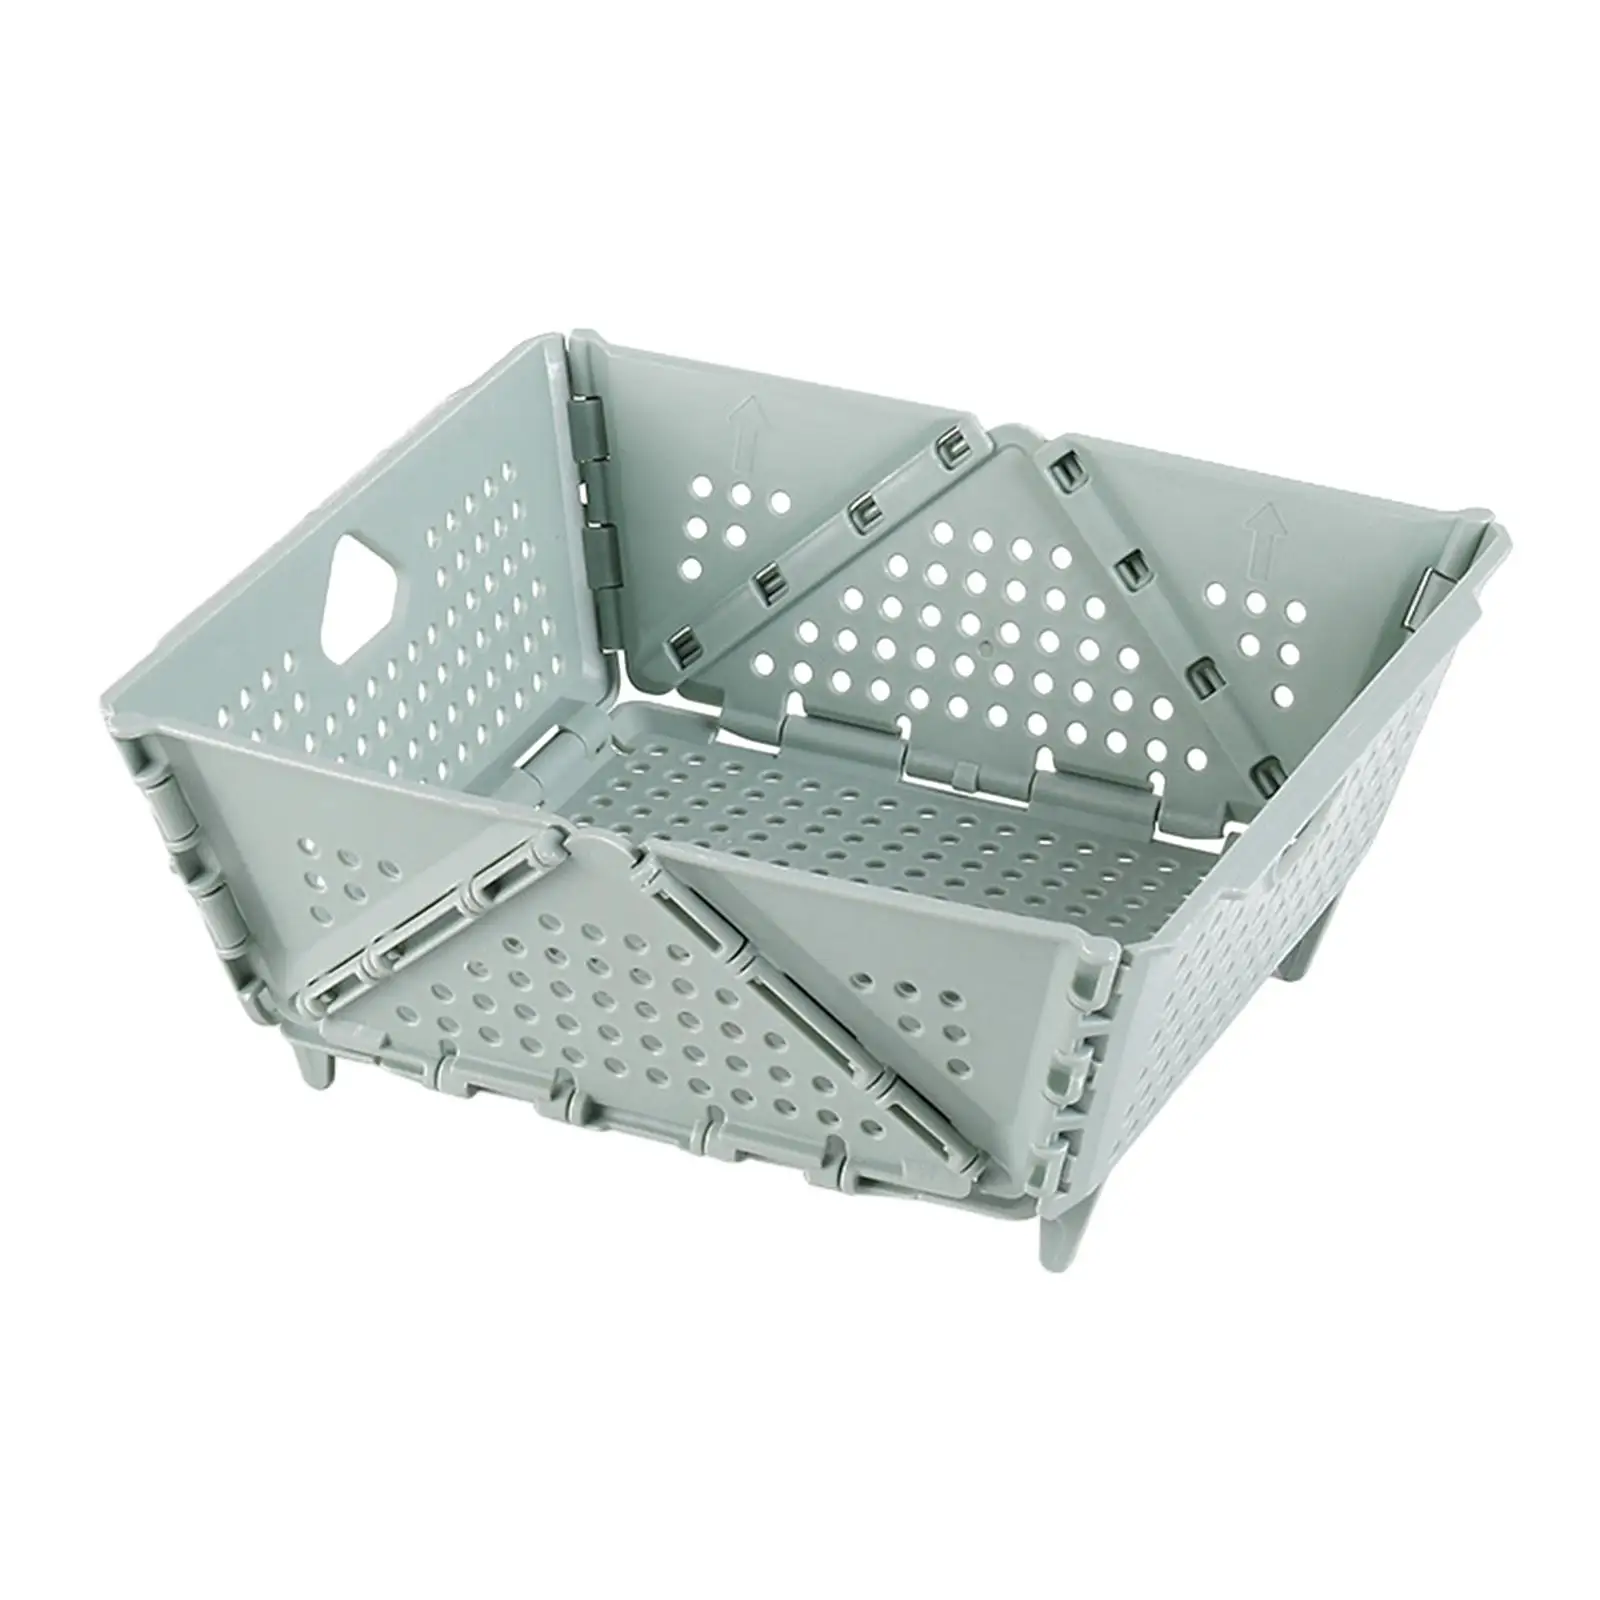 Folding Basket 23x20cm with Stand Base Multipurpose Container Collapsible Crates for Office Bedroom Livingroom Bathroom Kitchen